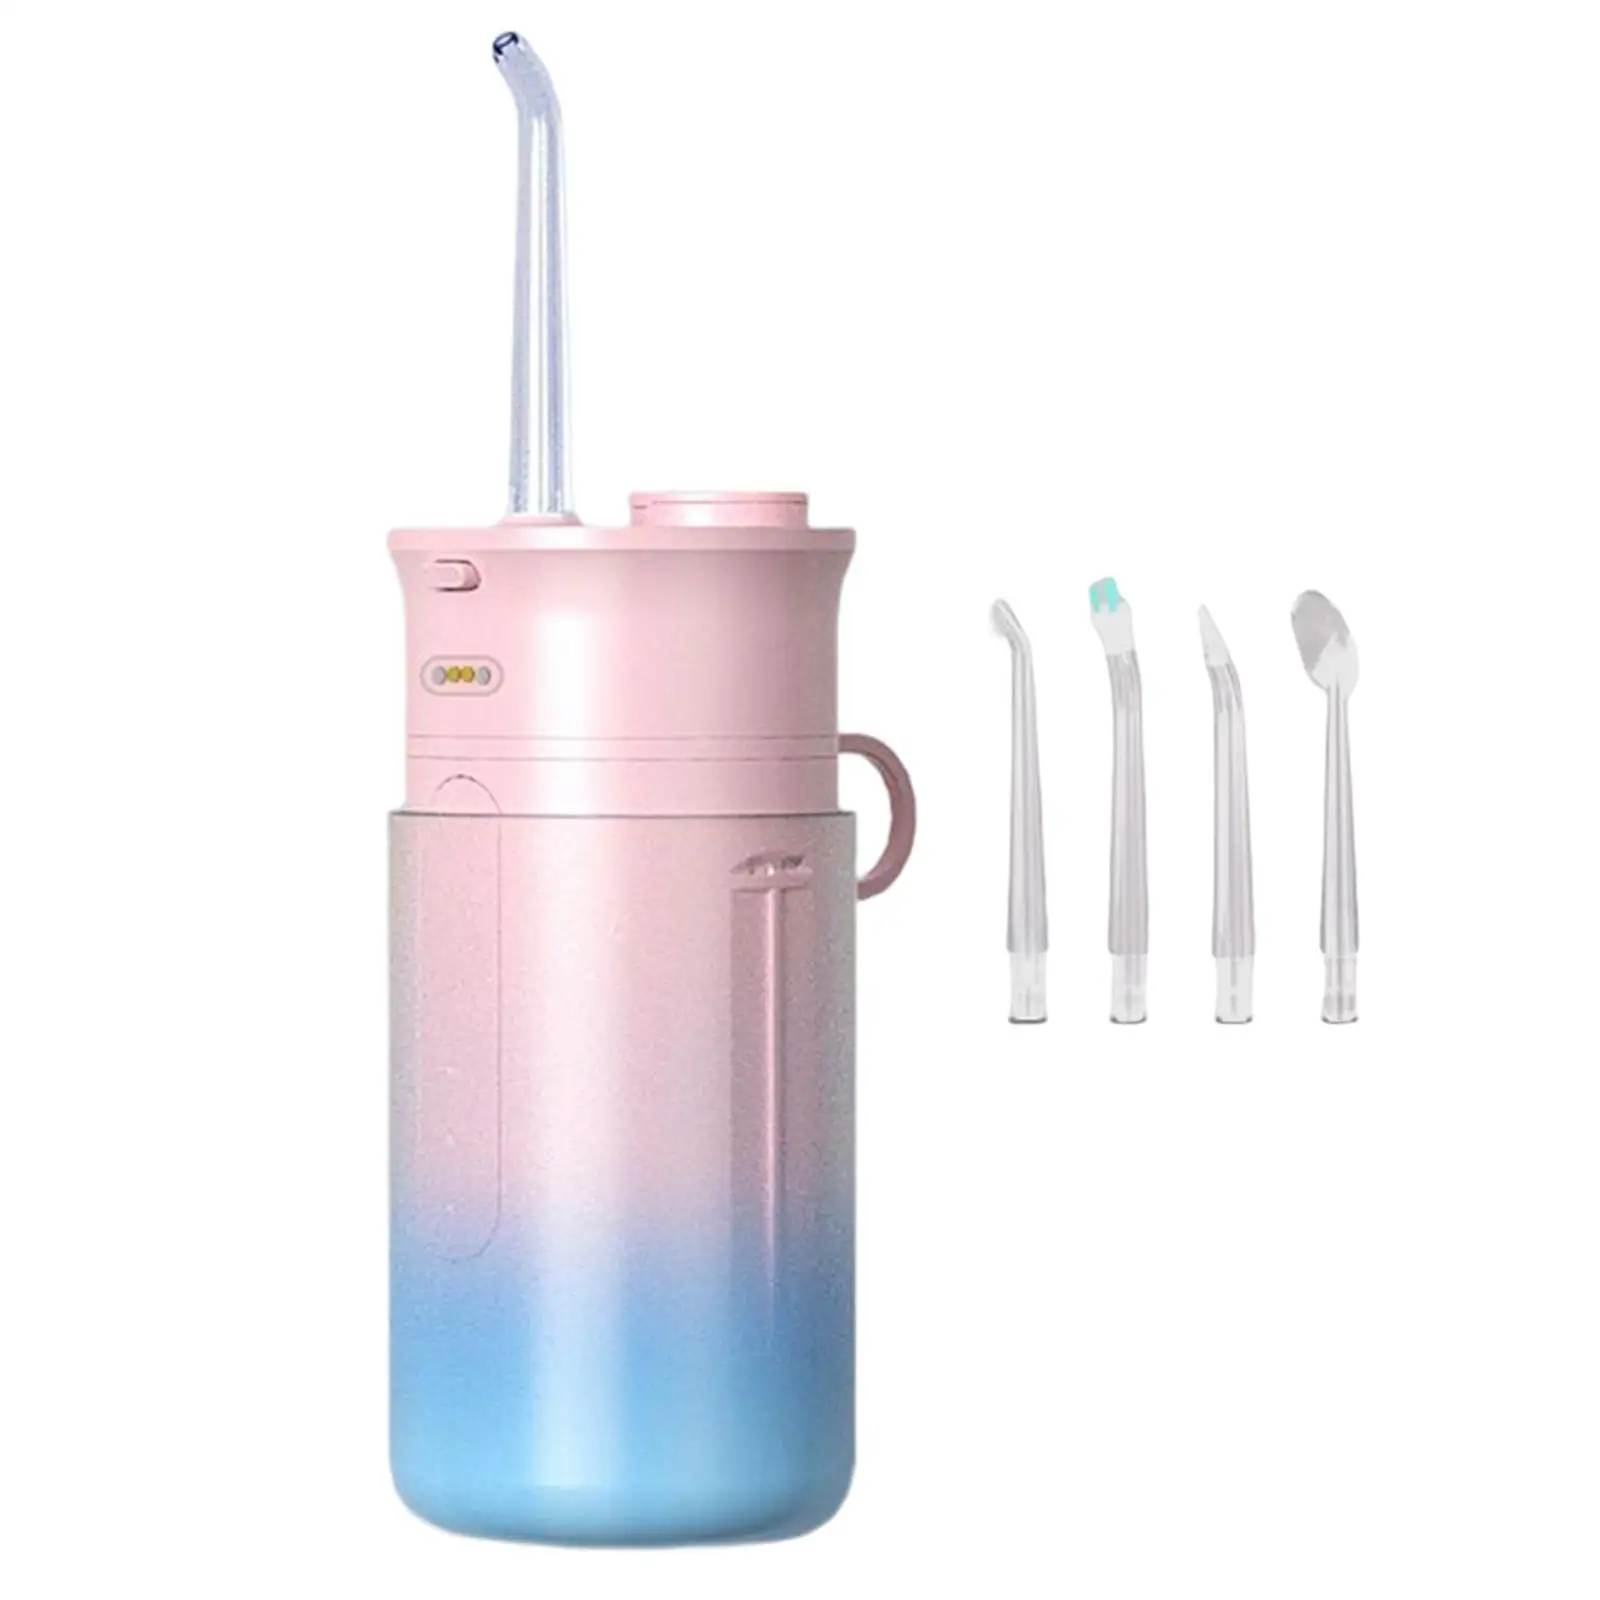 Cordless Oral Irrigator IPX7 Electric Flosser with 3 Modes 200ml Waterproof Rechargeable Telescopic for Home Use Travel